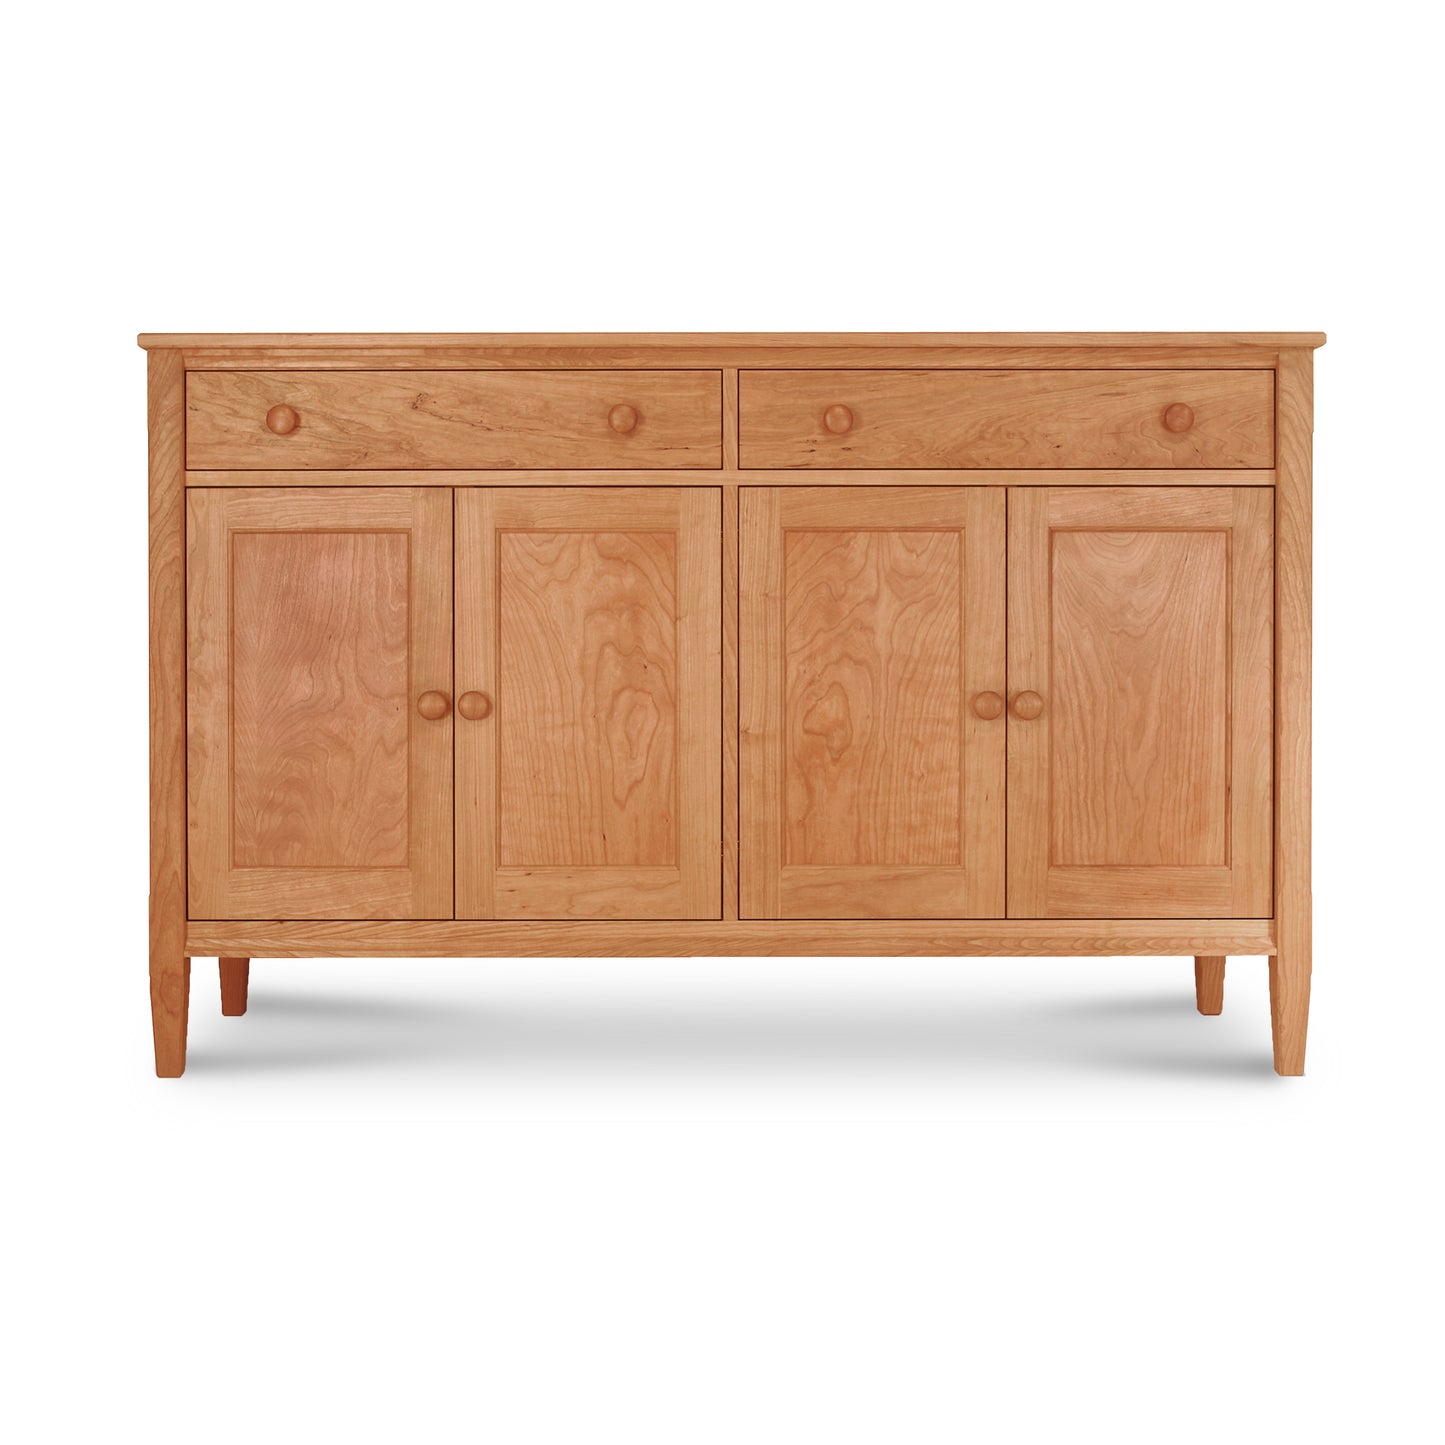 A Vermont Shaker Large 60" Sideboard by Maple Corner Woodworks, wooden kitchen storage piece with two doors and two drawers.